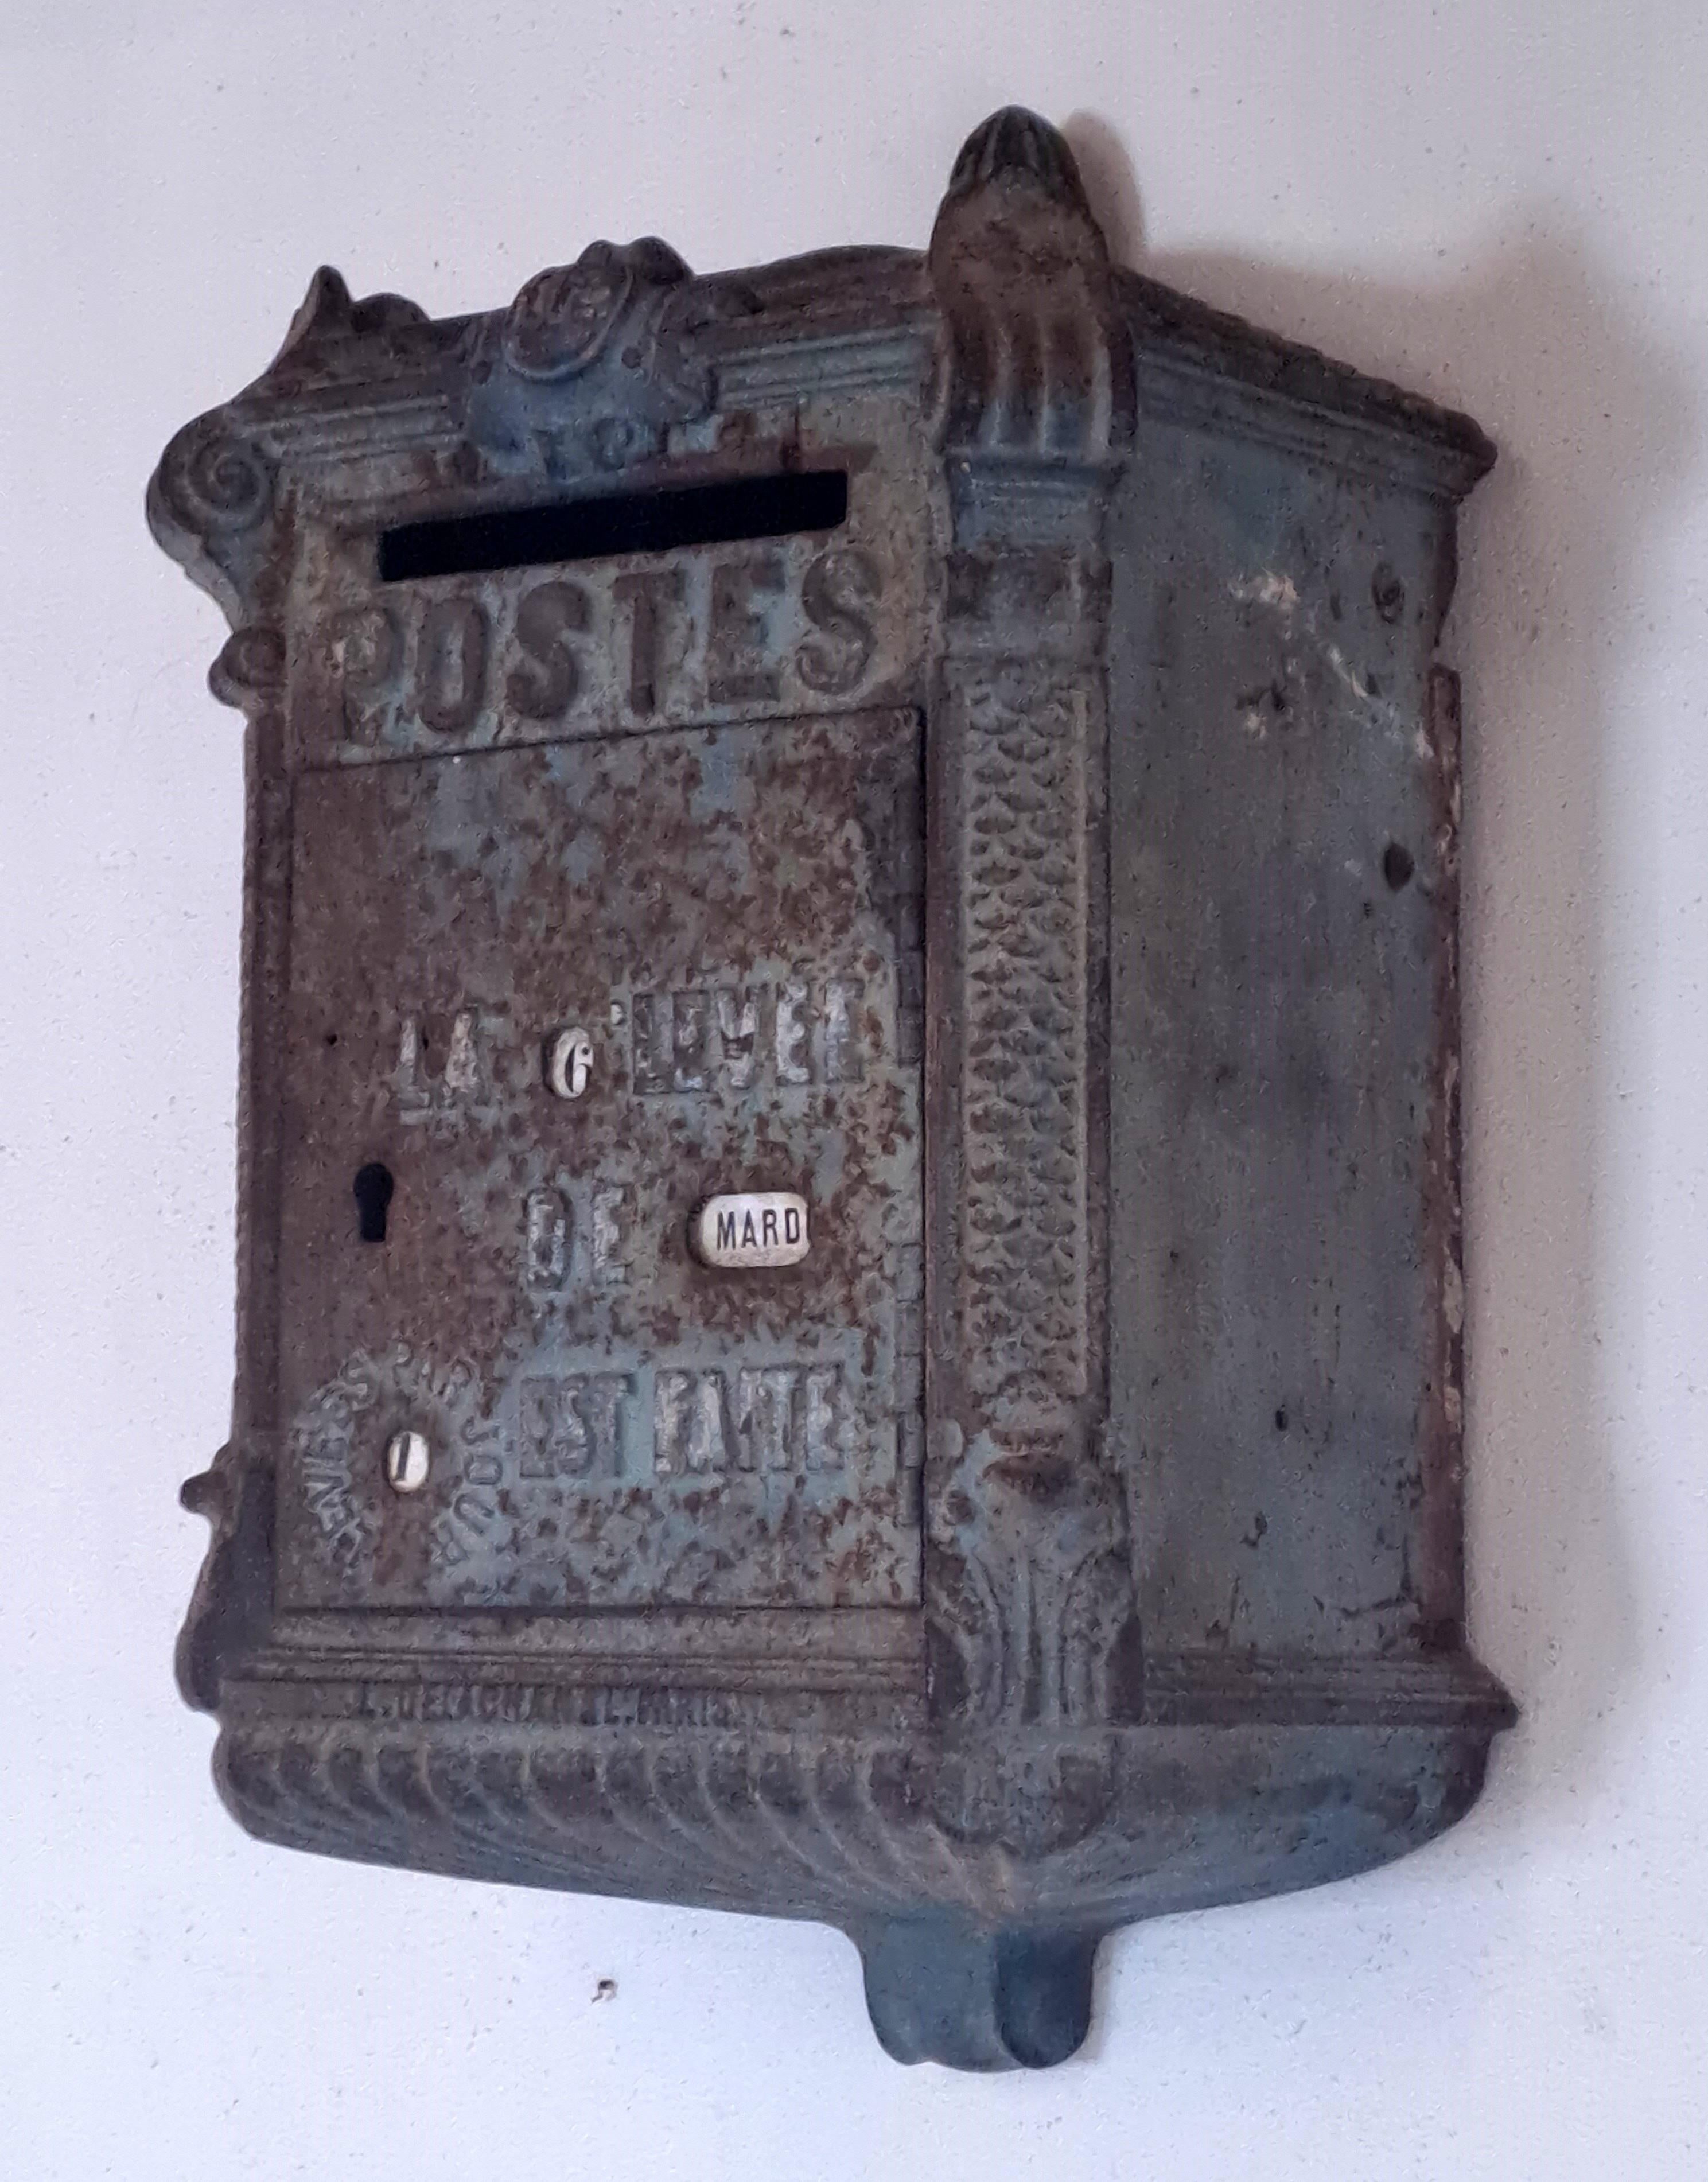 French Post Office Mailbox - Cast Iron - Delachanal Model - Late 19th Century For Sale 5